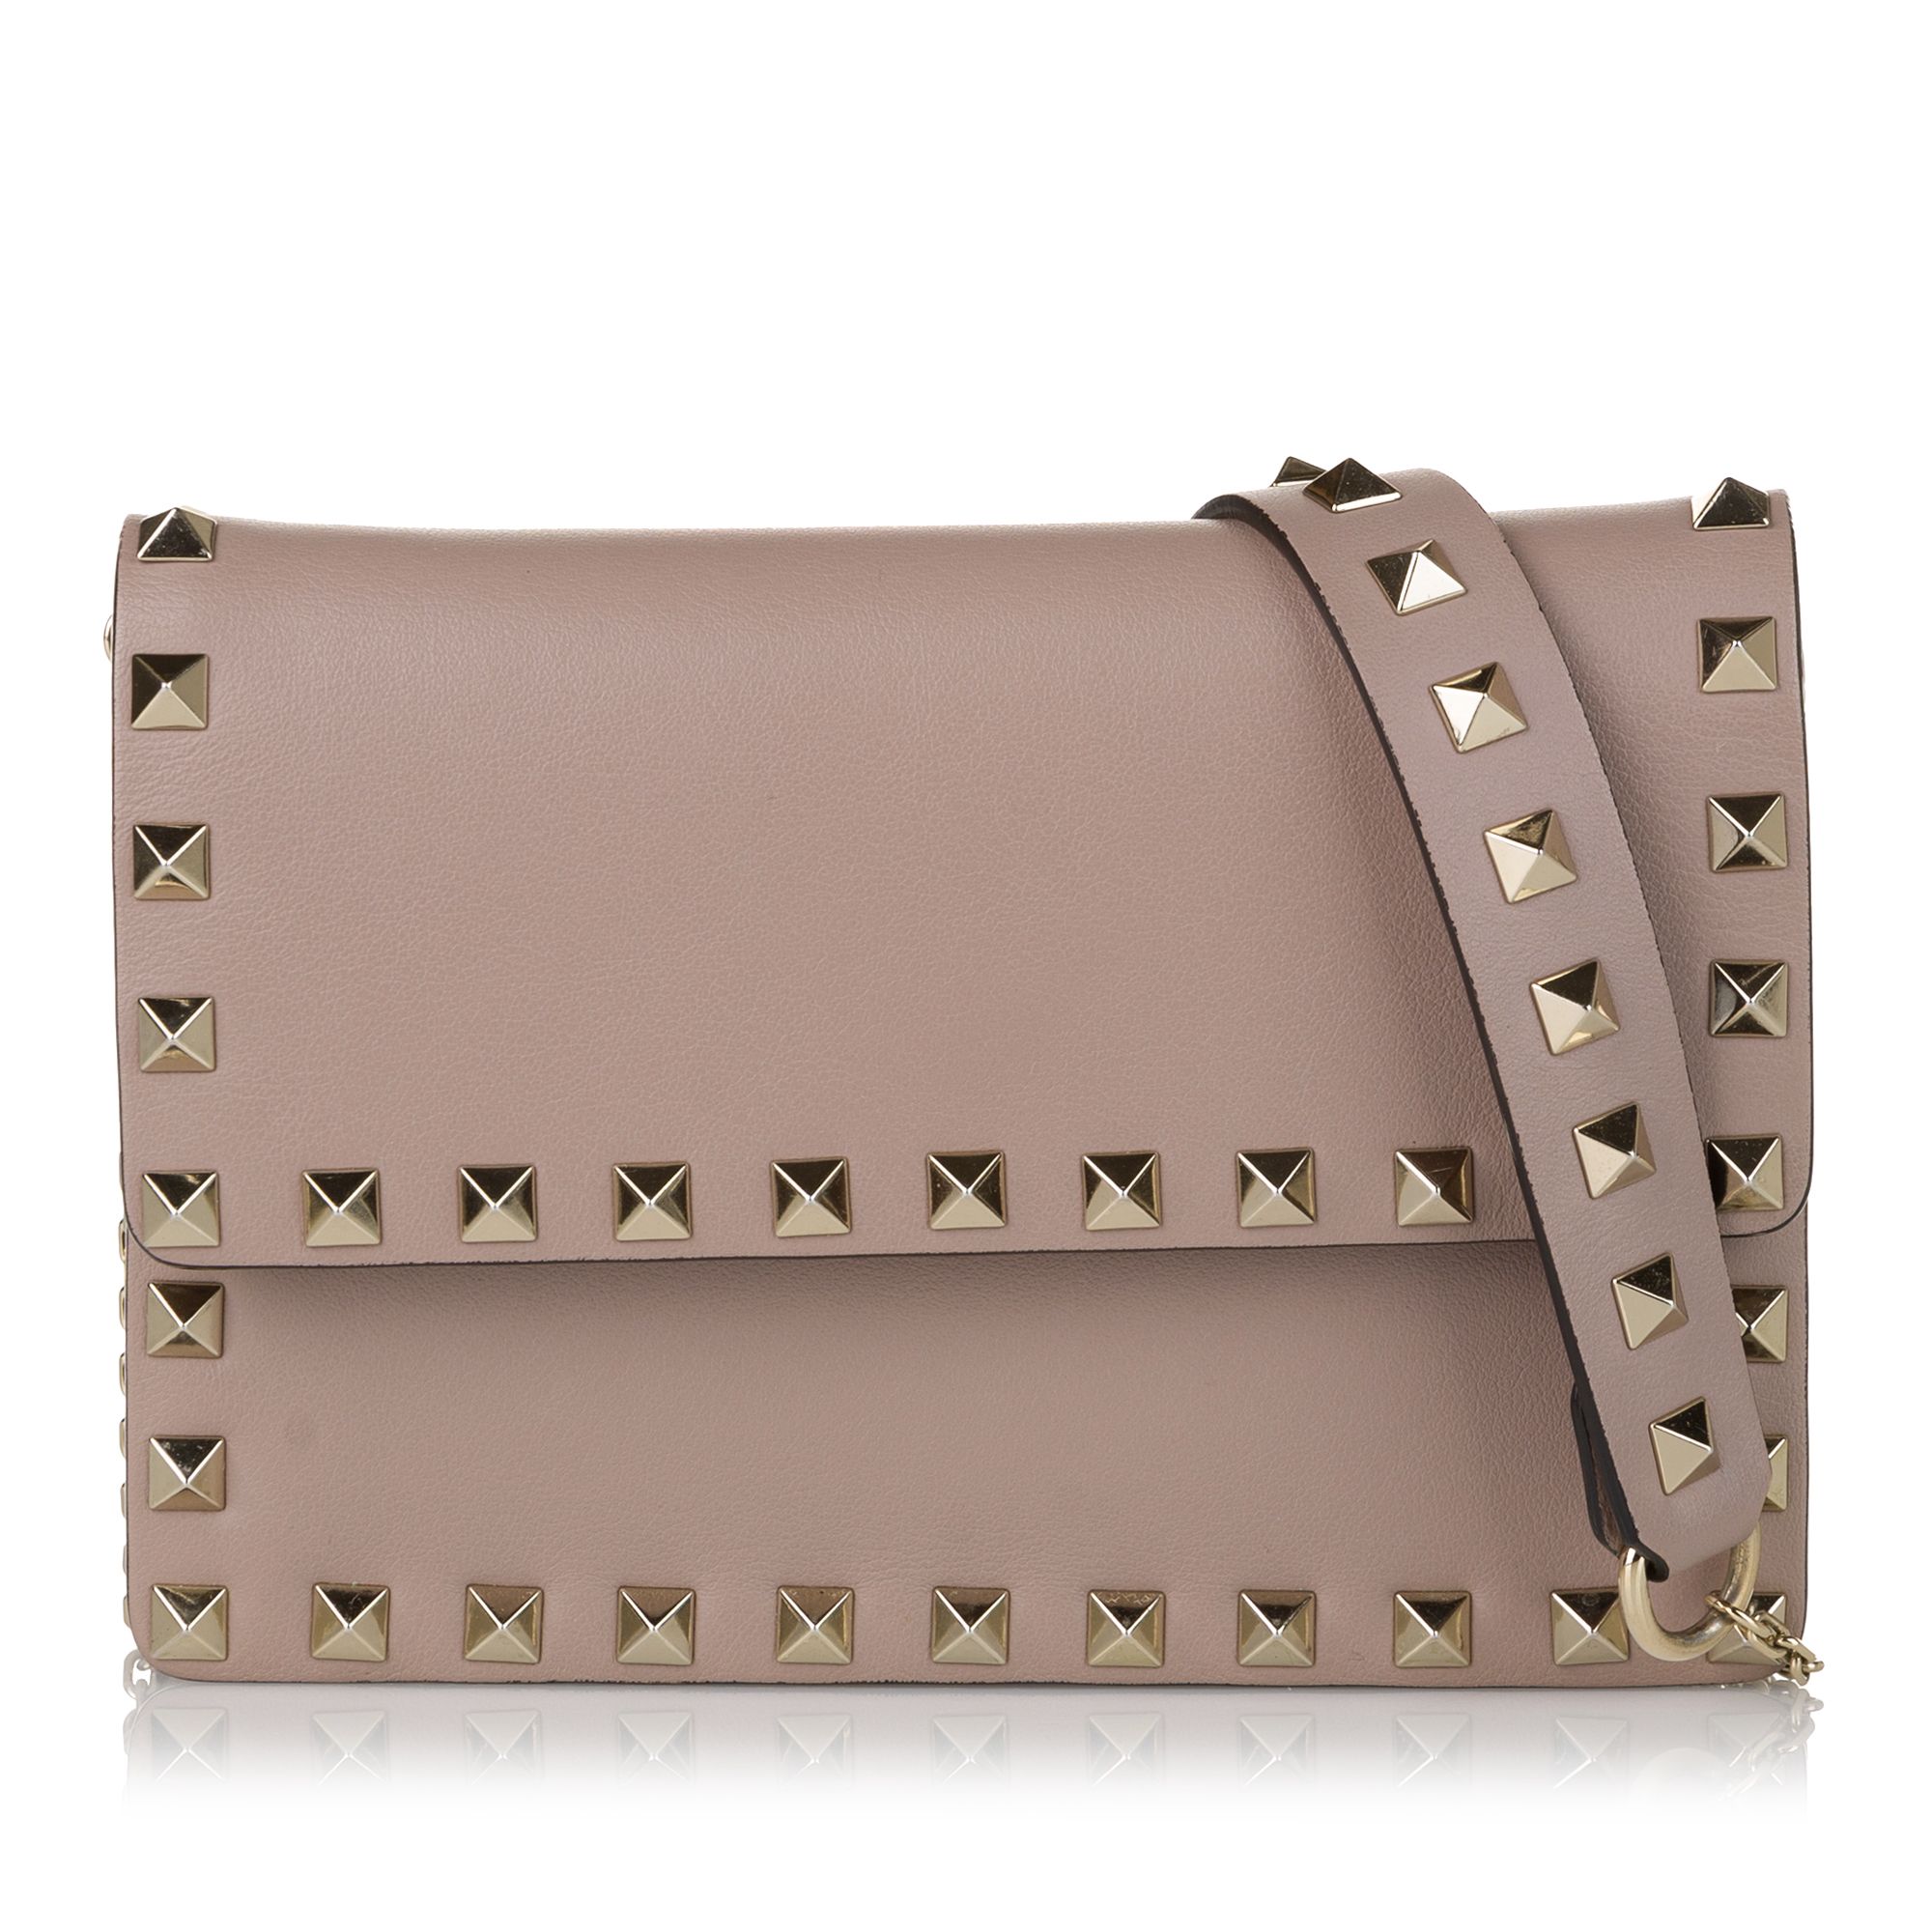 VINTAGE. RRP AS NEW. This crossbody bag features a leather body with stud details, a studded flat leather strap, a front flap with a magnetic snap closure, and an interior slip pocket.

Dimensions:
Length 12cm
Width 16cm
Depth 4cm
Shoulder Drop 58cm

Original Accessories: Dust Bag

Color: Brown x Beige
Material: Leather x Calf
Country of Origin: Italy
Boutique Reference: SSU162687K1342


Product Rating: VeryGoodCondition

Certificate of Authenticity is available upon request with no extra fee required. Please contact our customer service team.